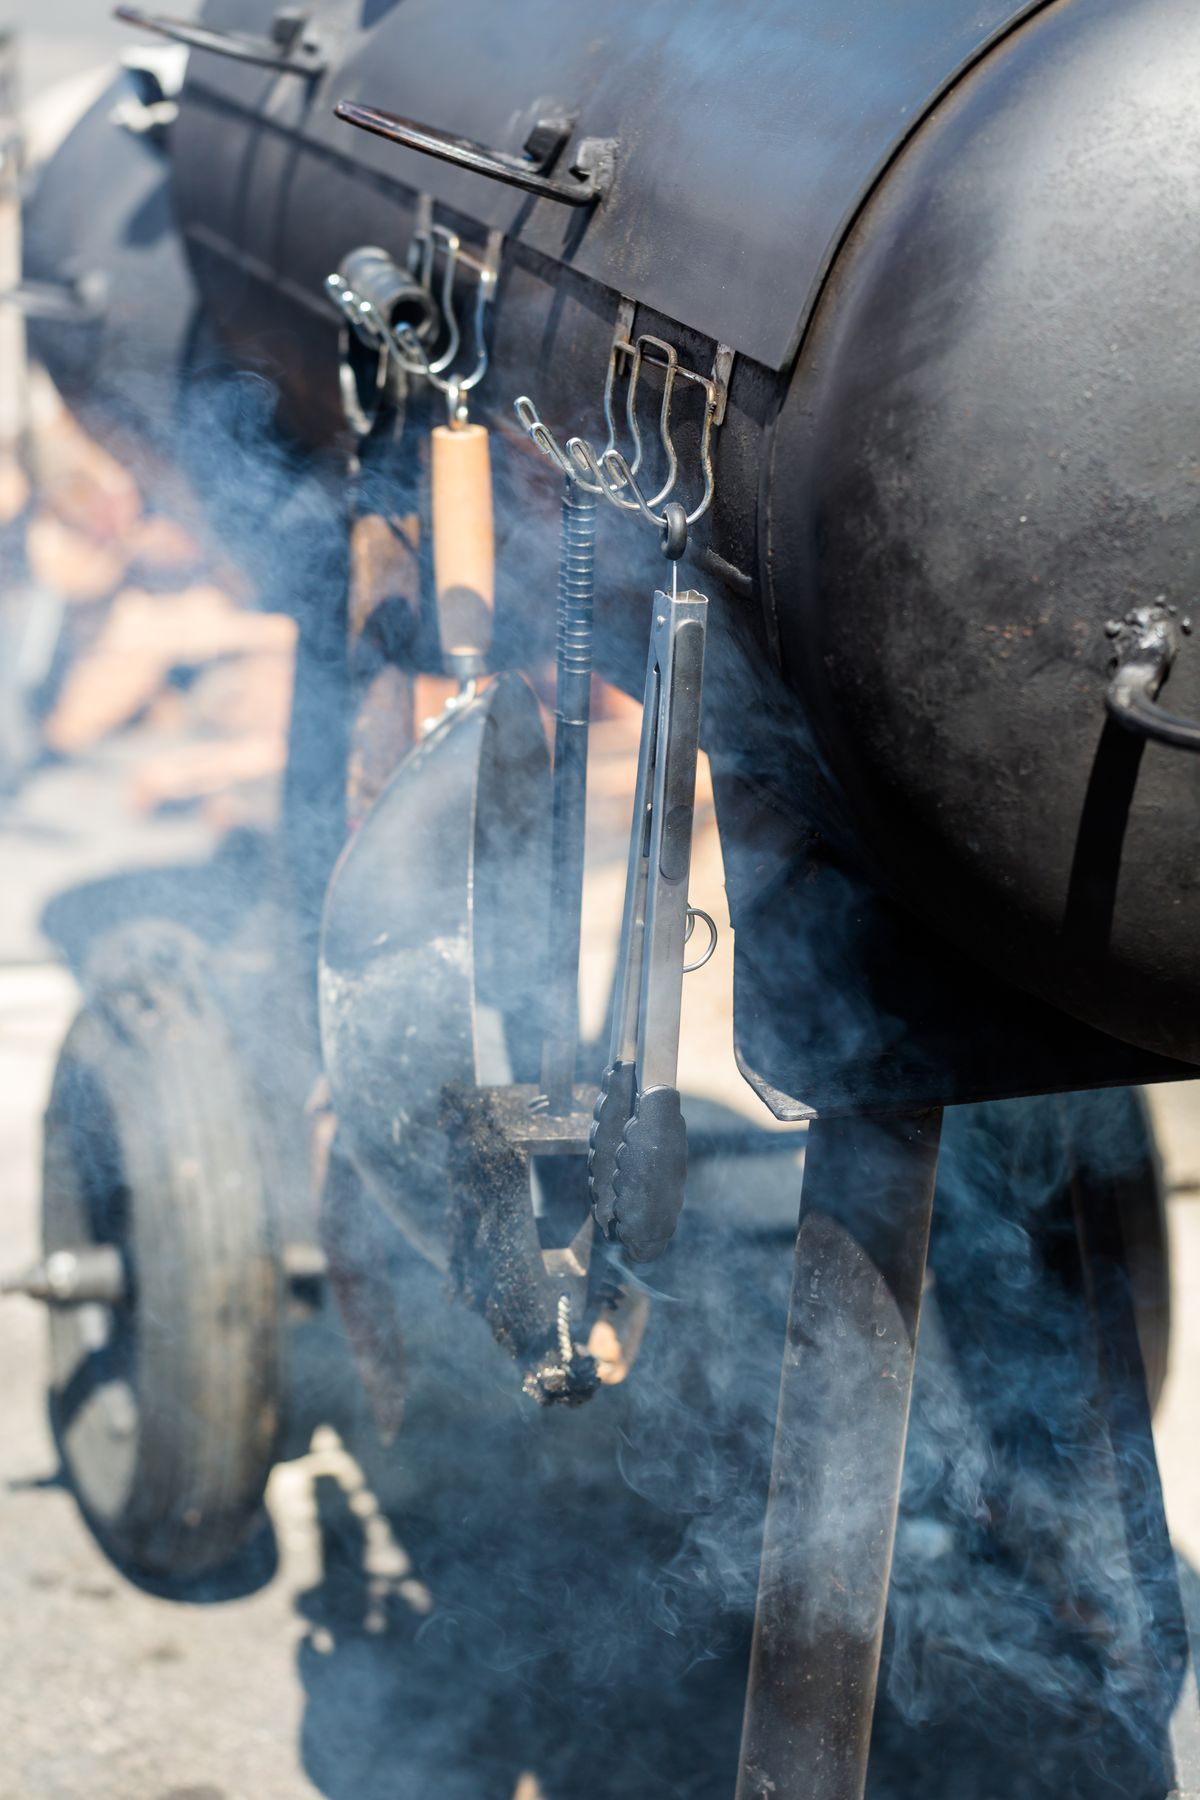 A barbecue smoker with lots of smoke coming out of it.